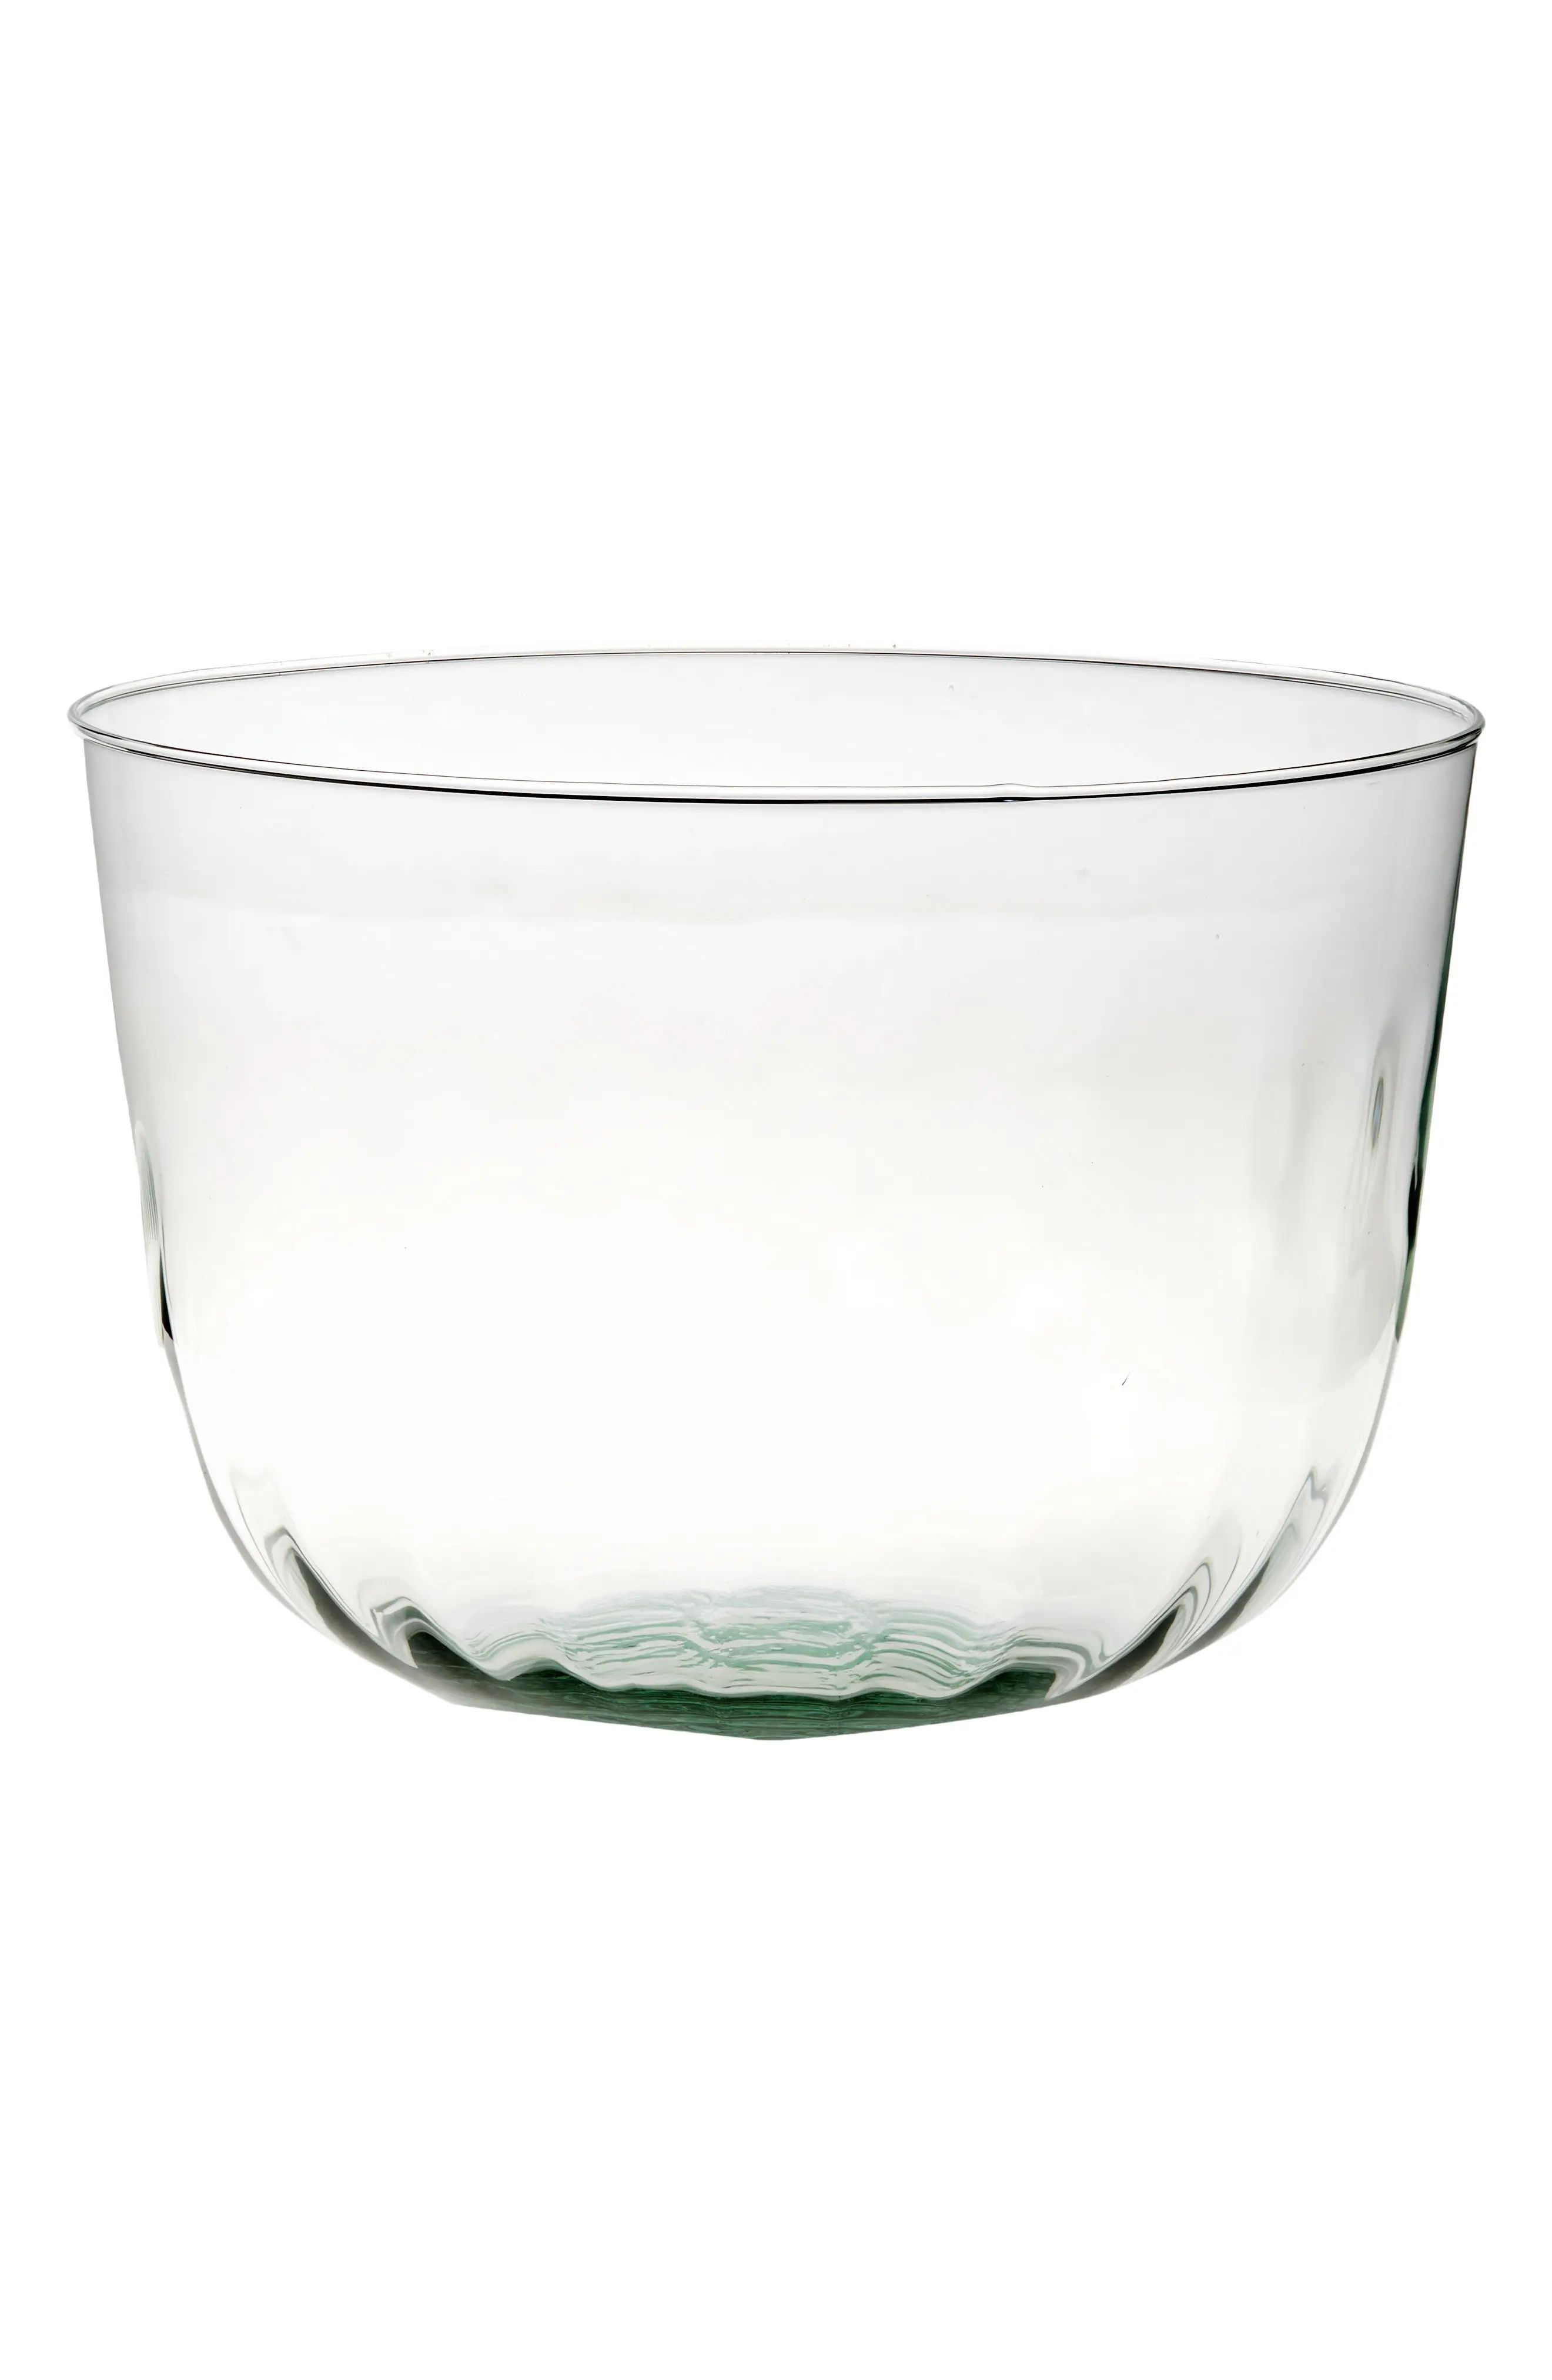 GOODEE x LSA MIA Glass Serving Bowl in Clear at Nordstrom | Nordstrom